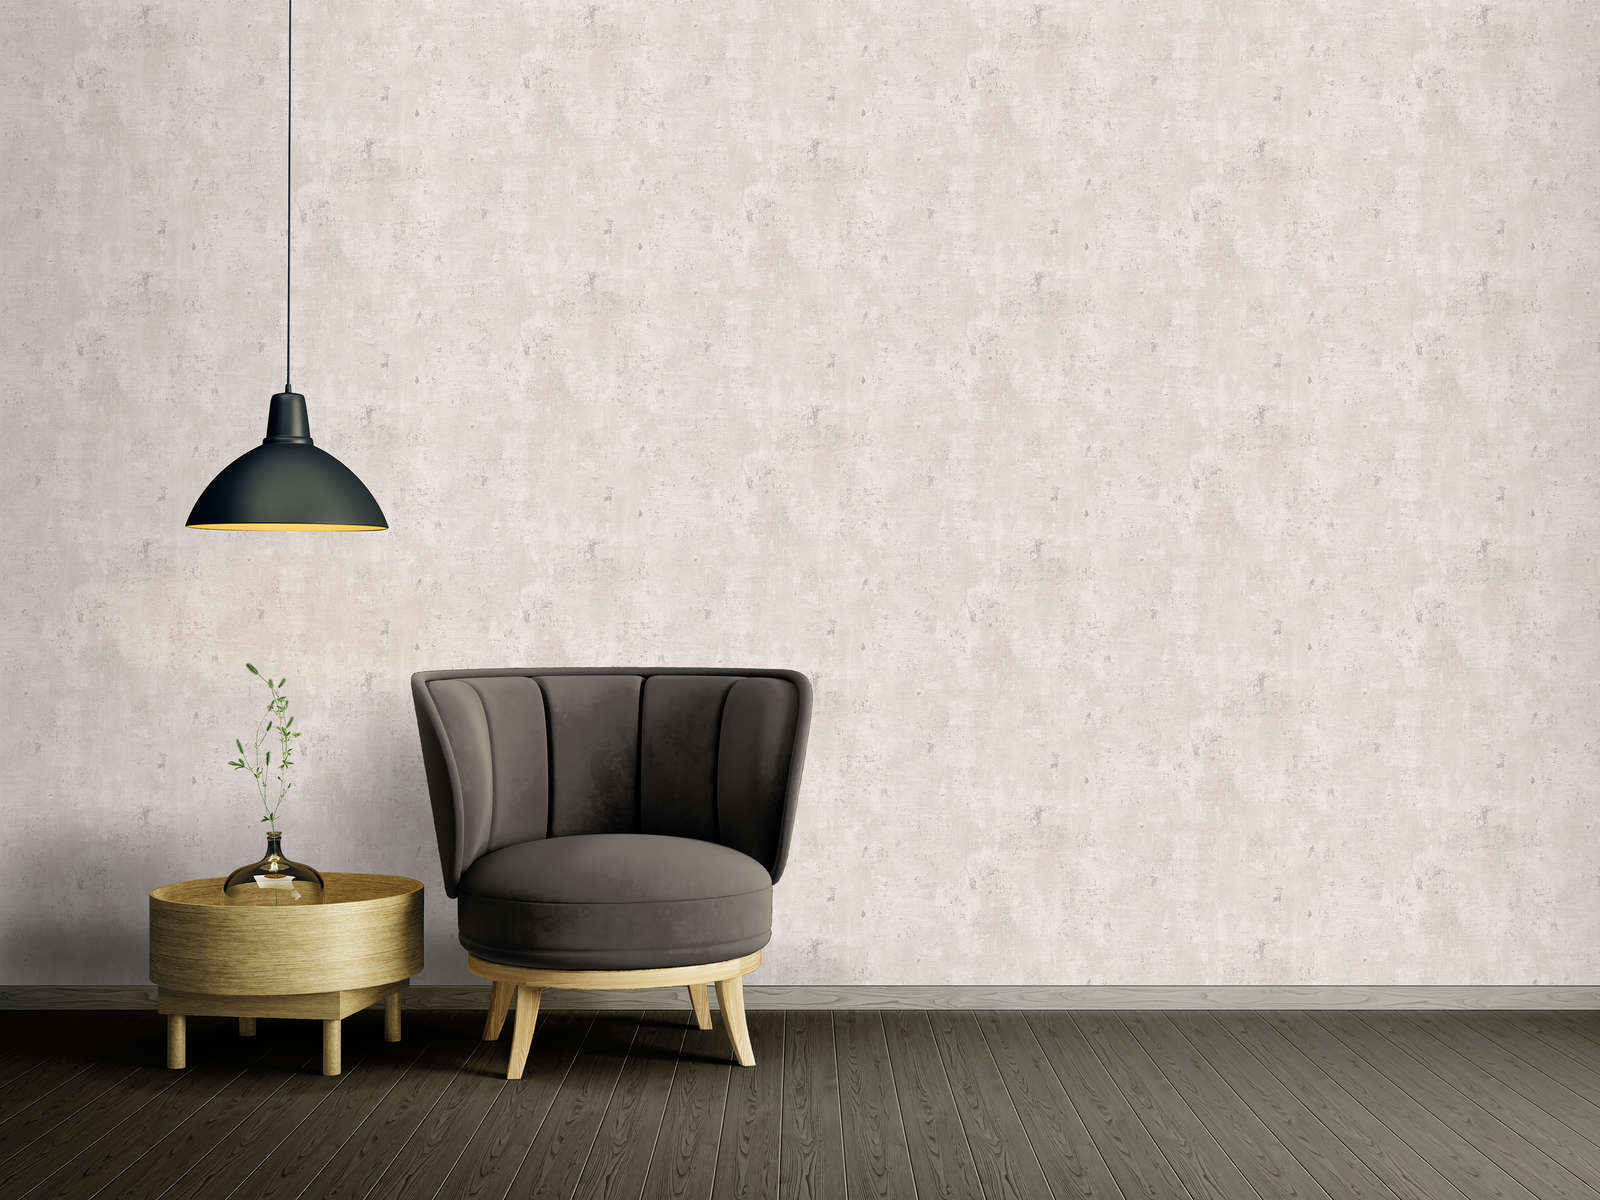             Non-woven wallpaper in used look with texture - white, grey, silver
        